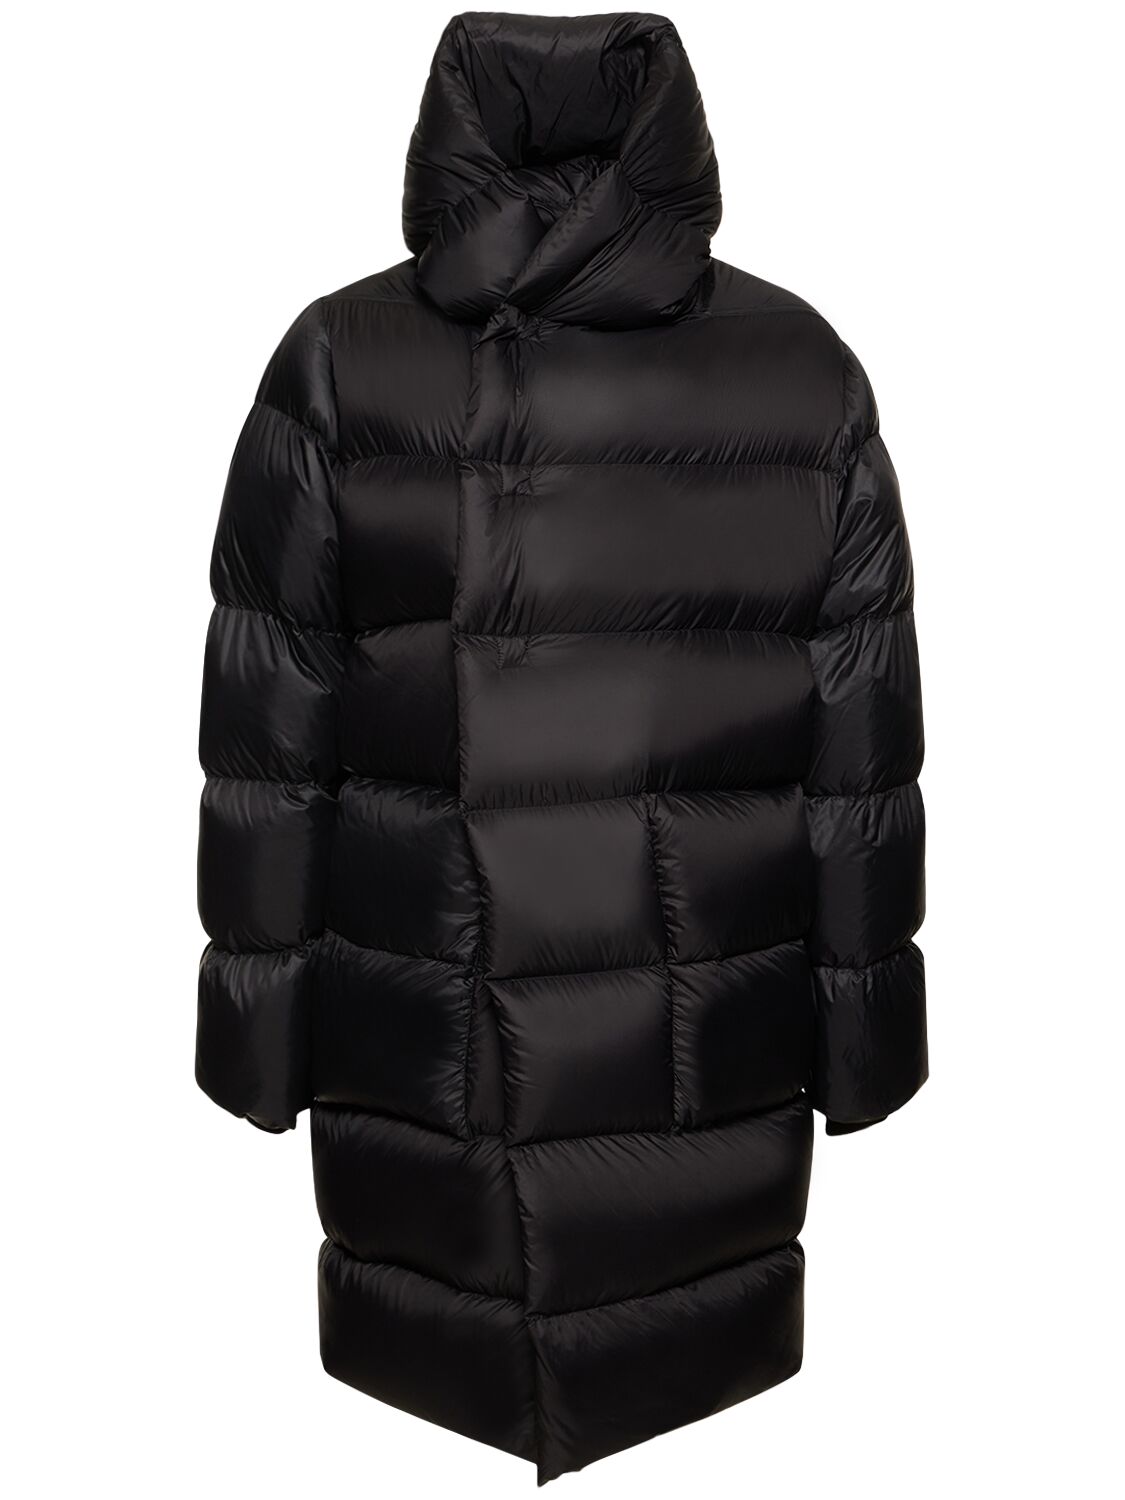 Image of Liner Hooded Long Down Jacket